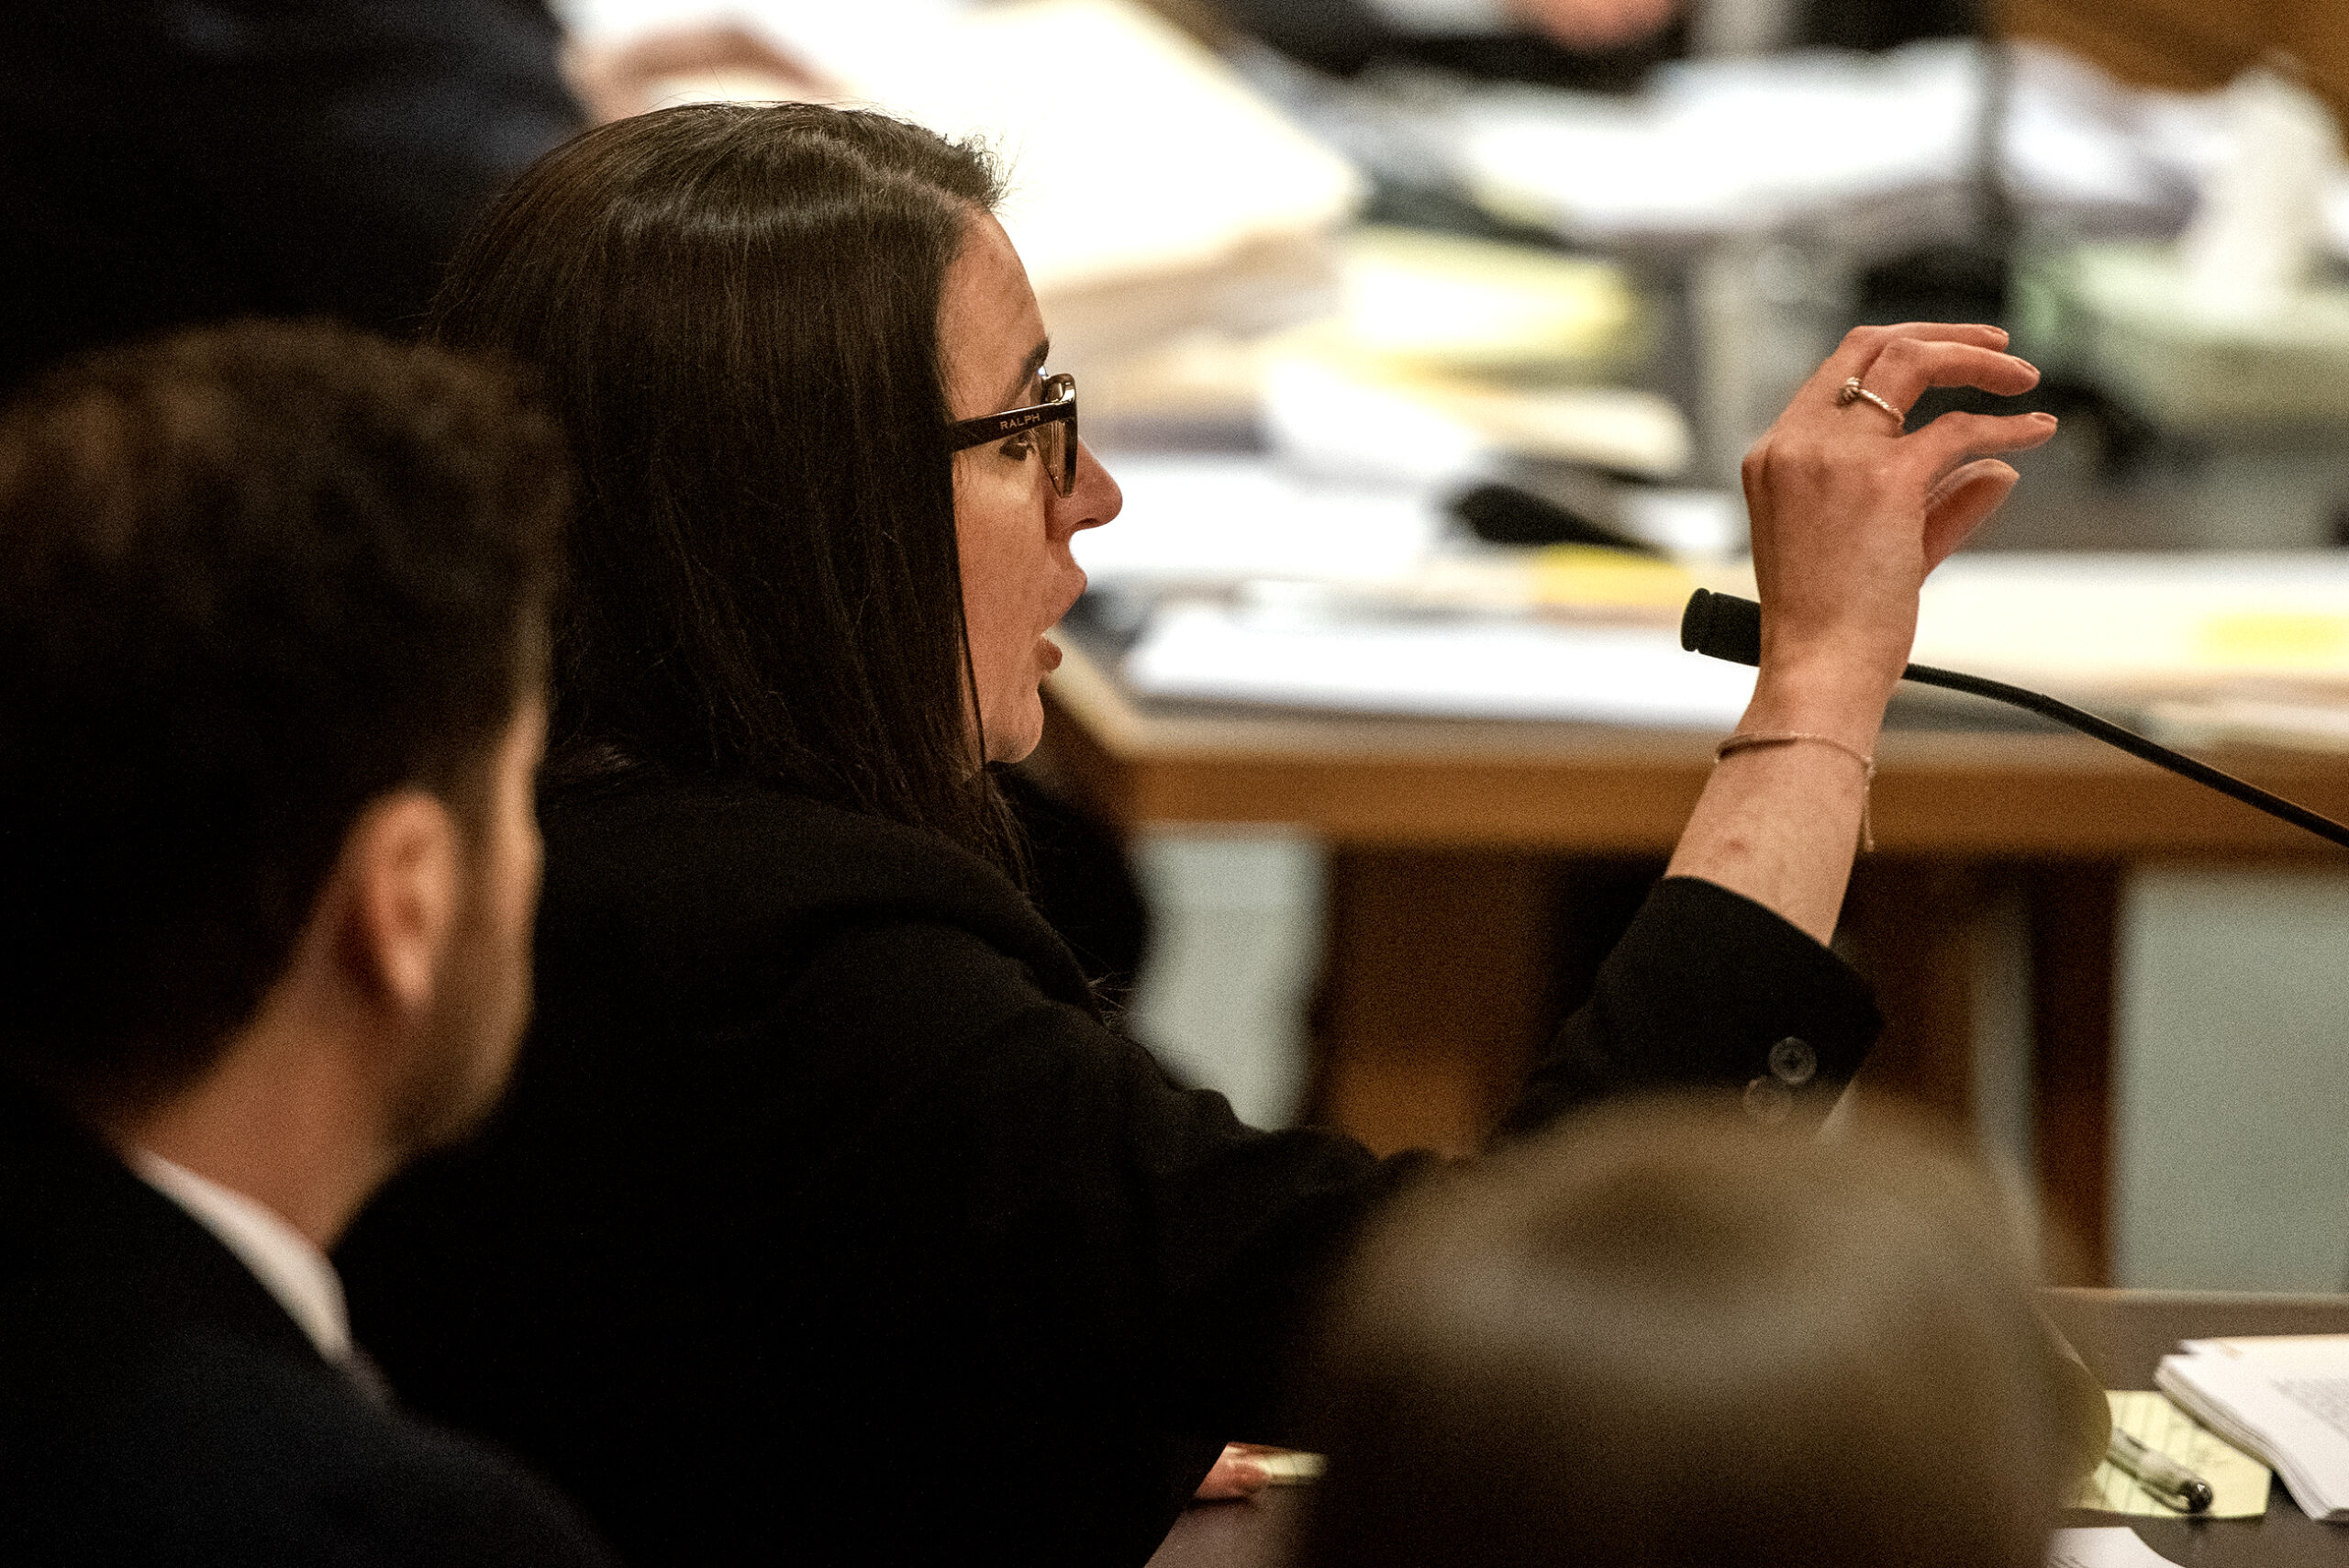 An attorney gestures as she speaks looking at the judge.